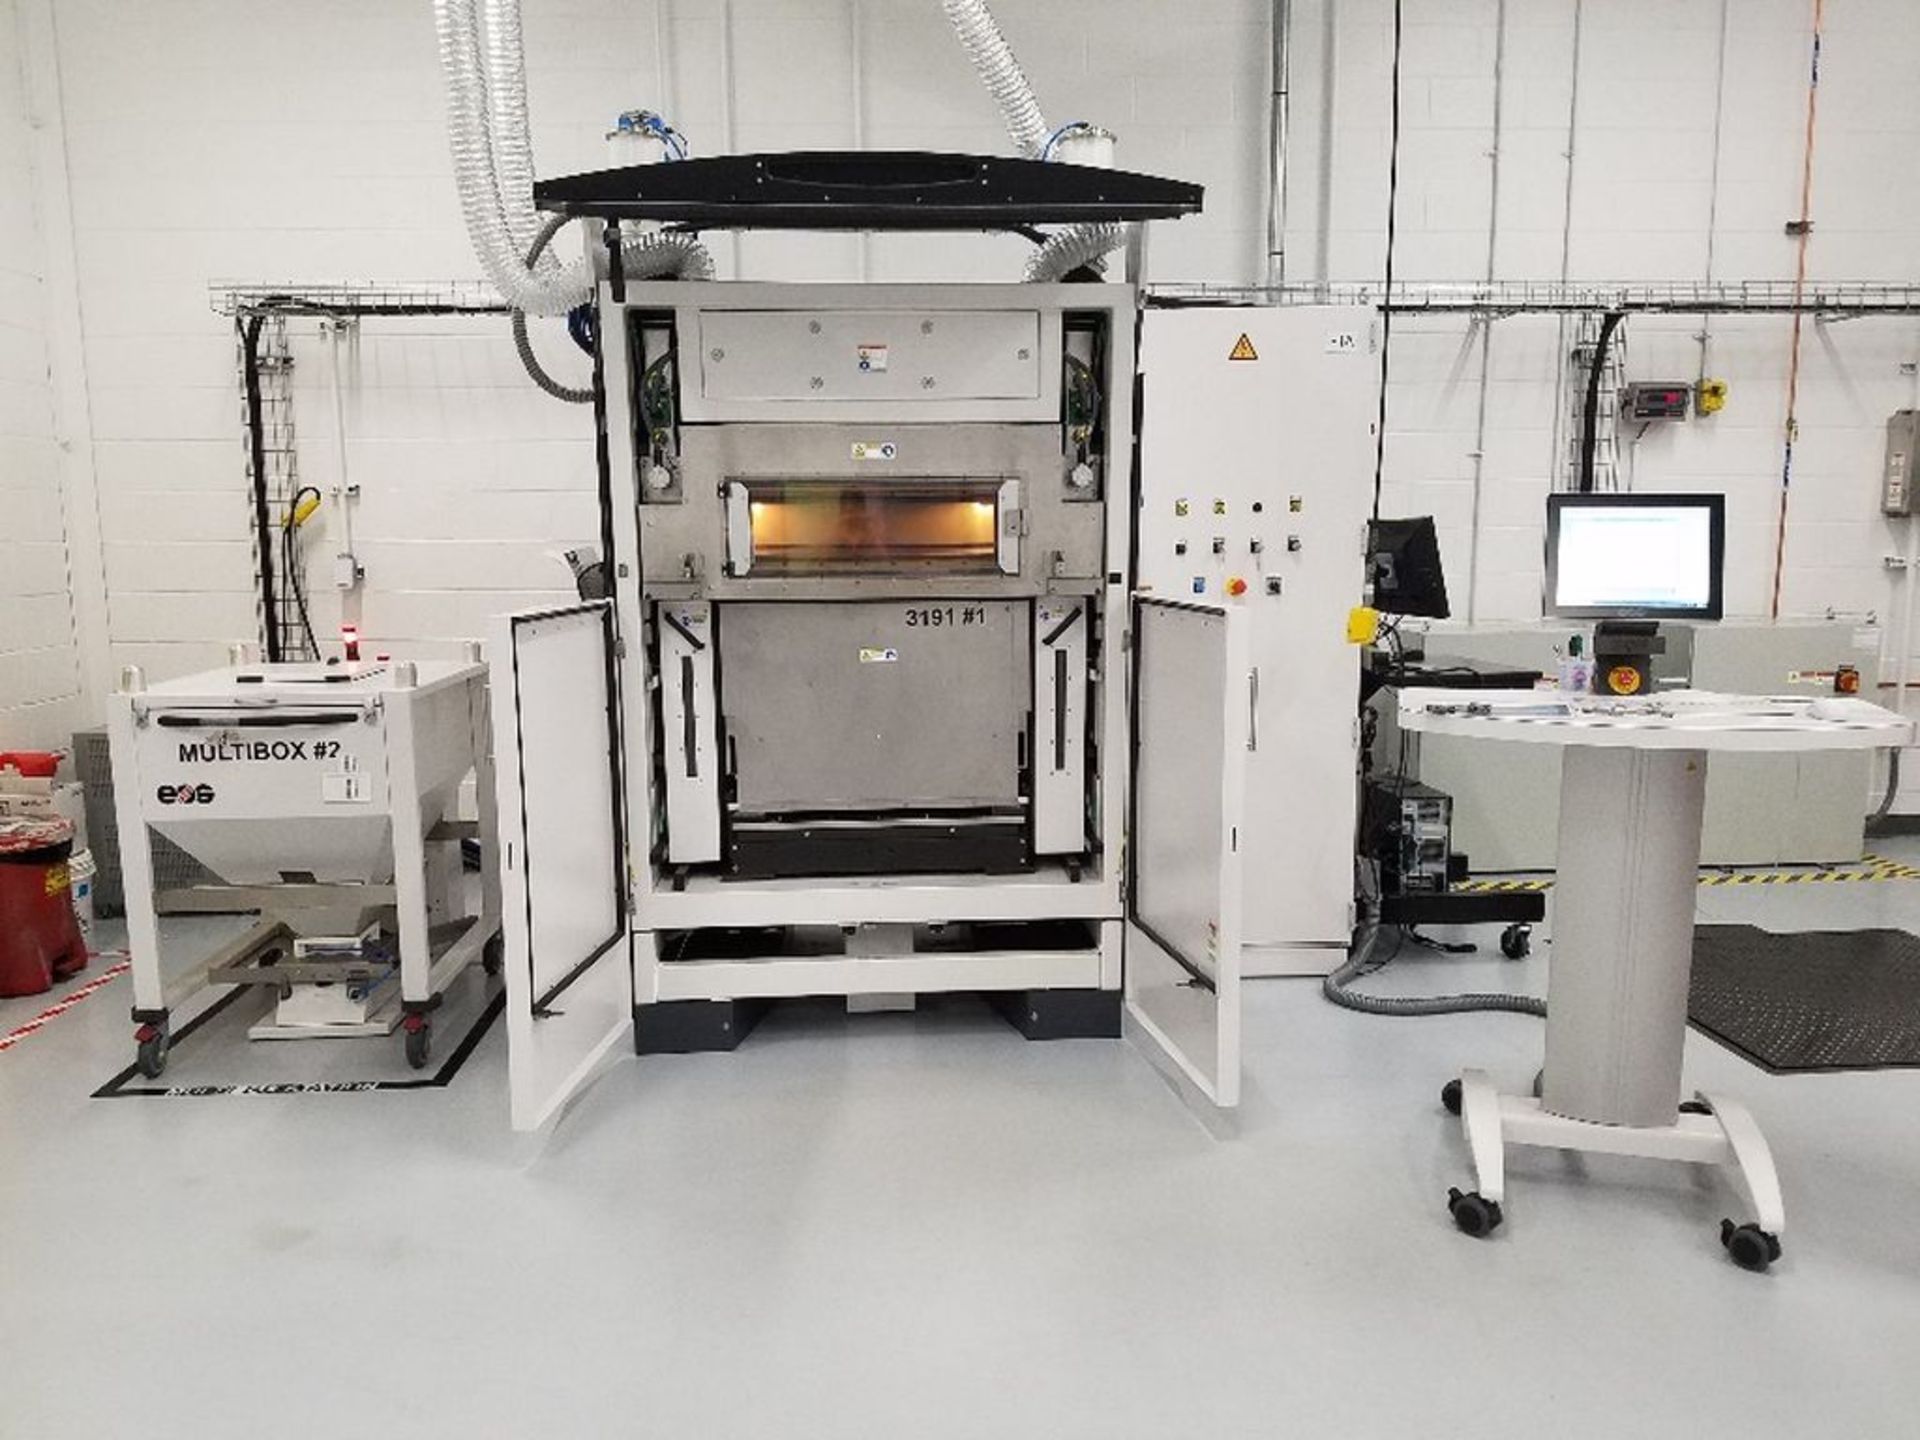 Lot of (2) EOS Additive Manufacturing Systems with (2) P800 SLS 3D Printers and Support Equipment